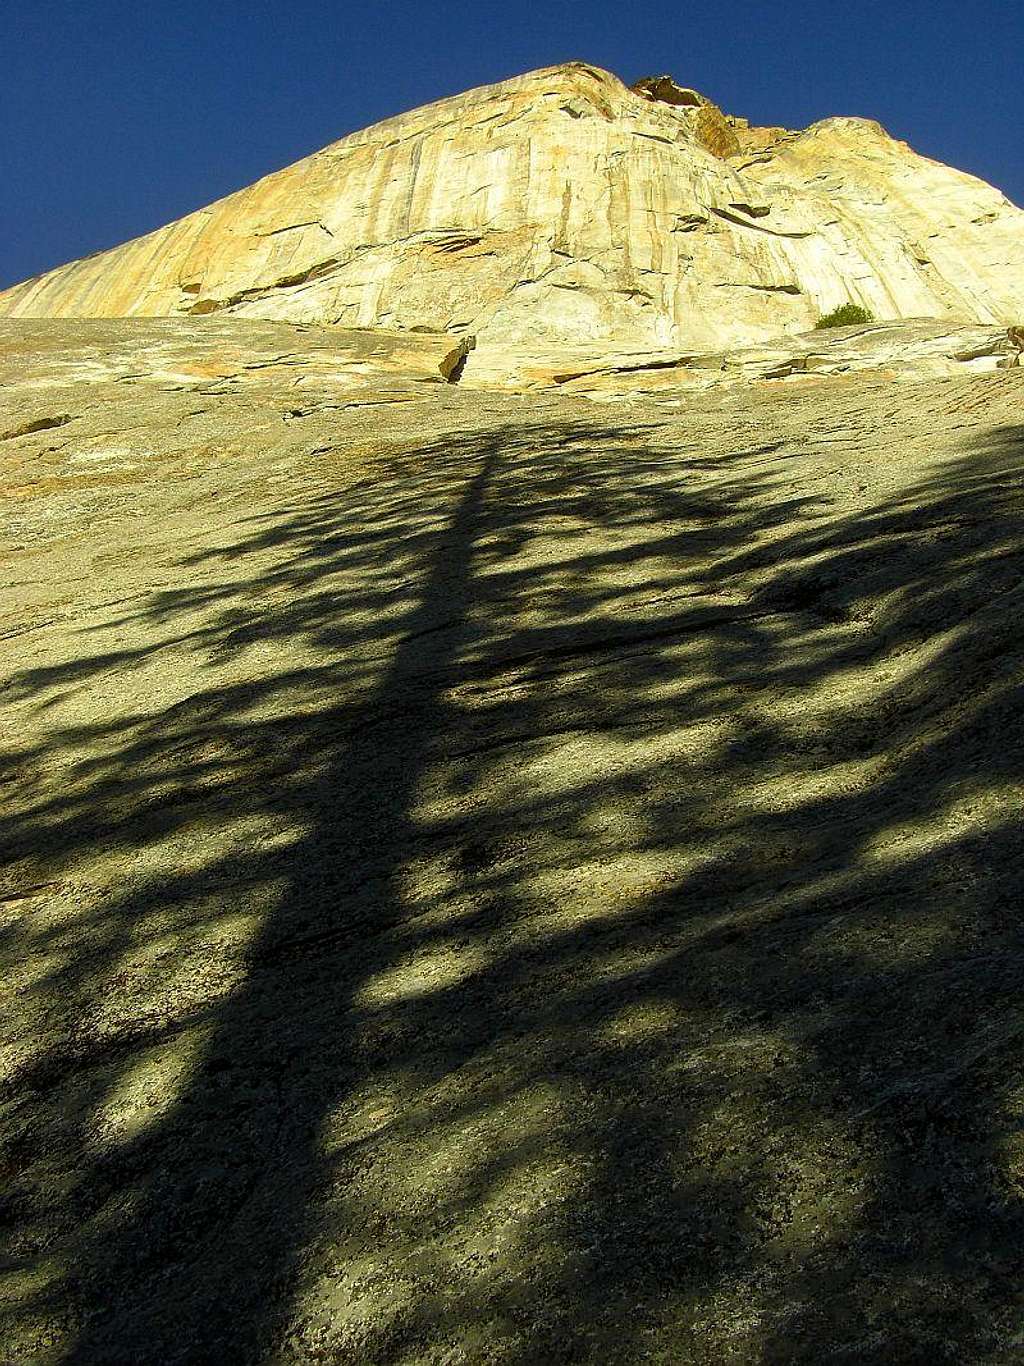 Leaning Tower & Shadow of Tree